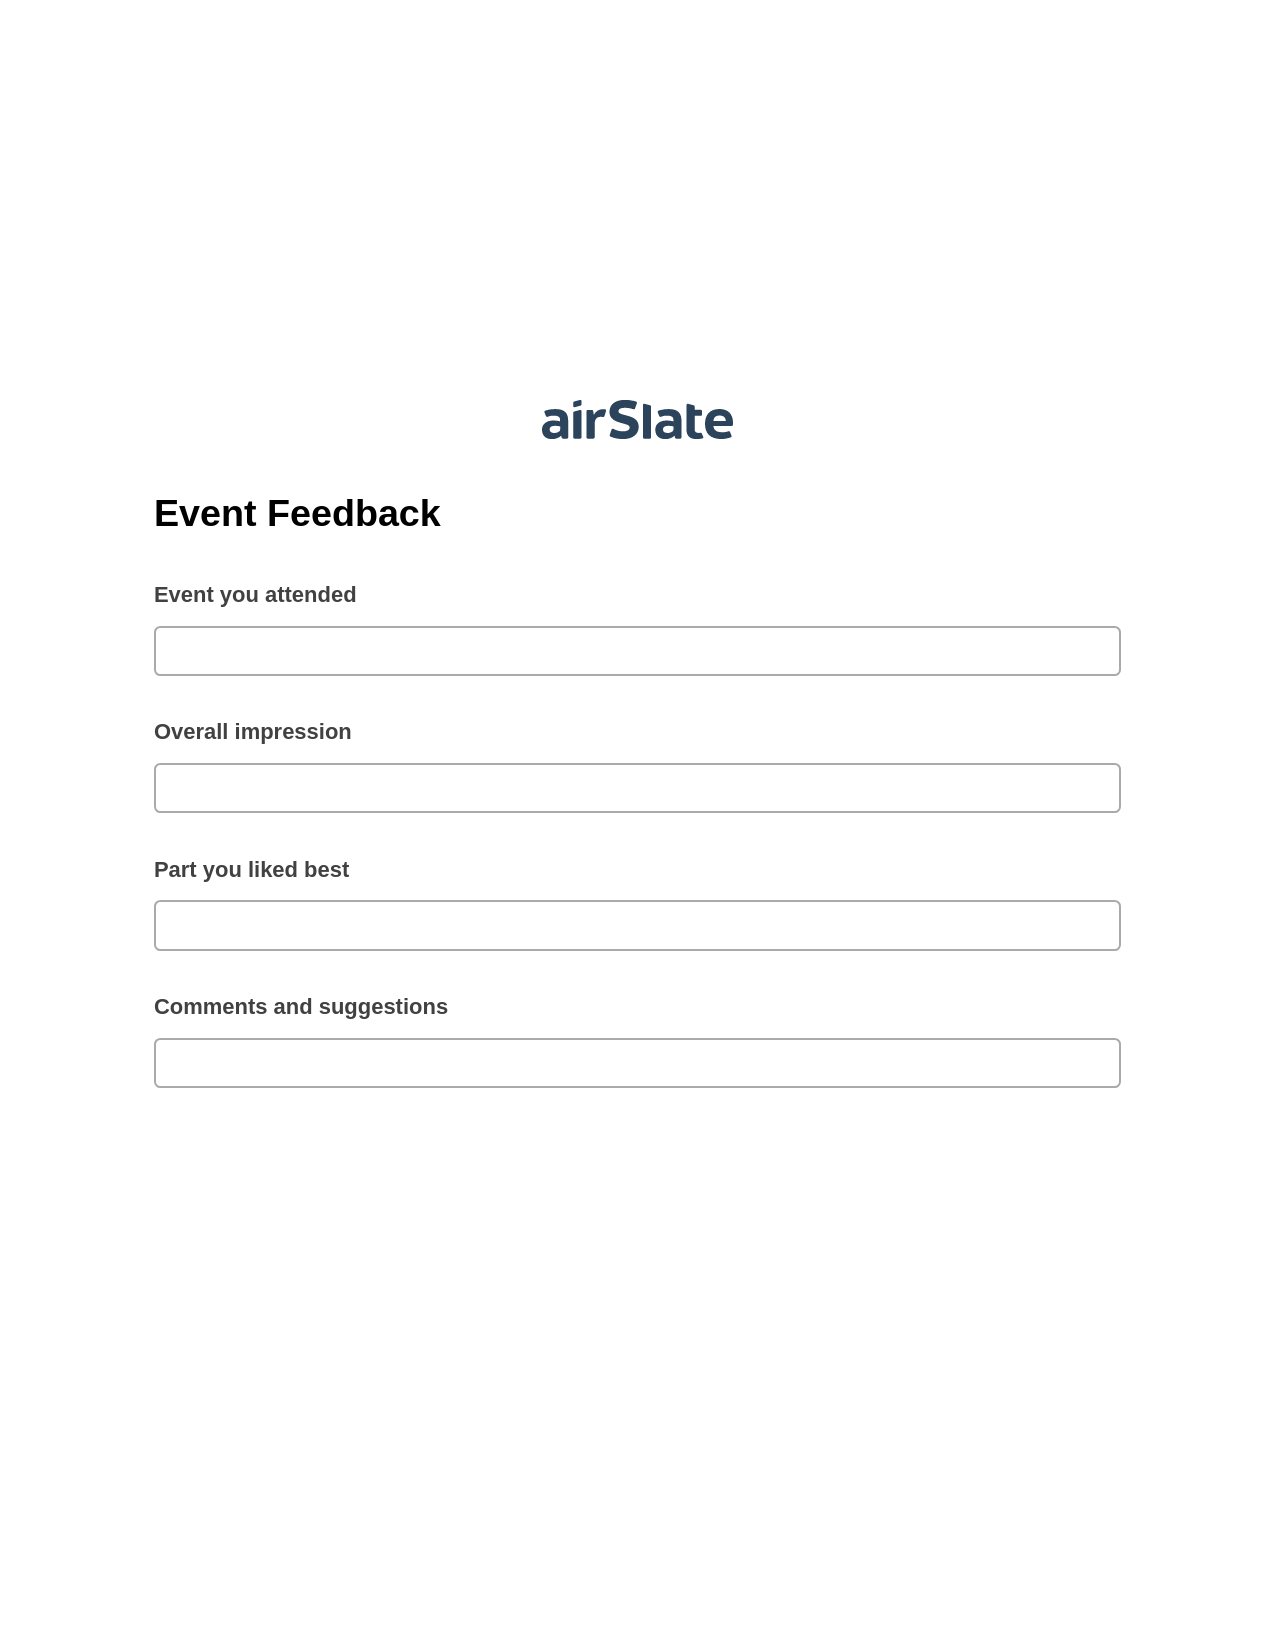 Event Feedback Pre-fill Slate from MS Dynamics 365 Records Bot, Audit Trail Bot, Email Notification Postfinish Bot